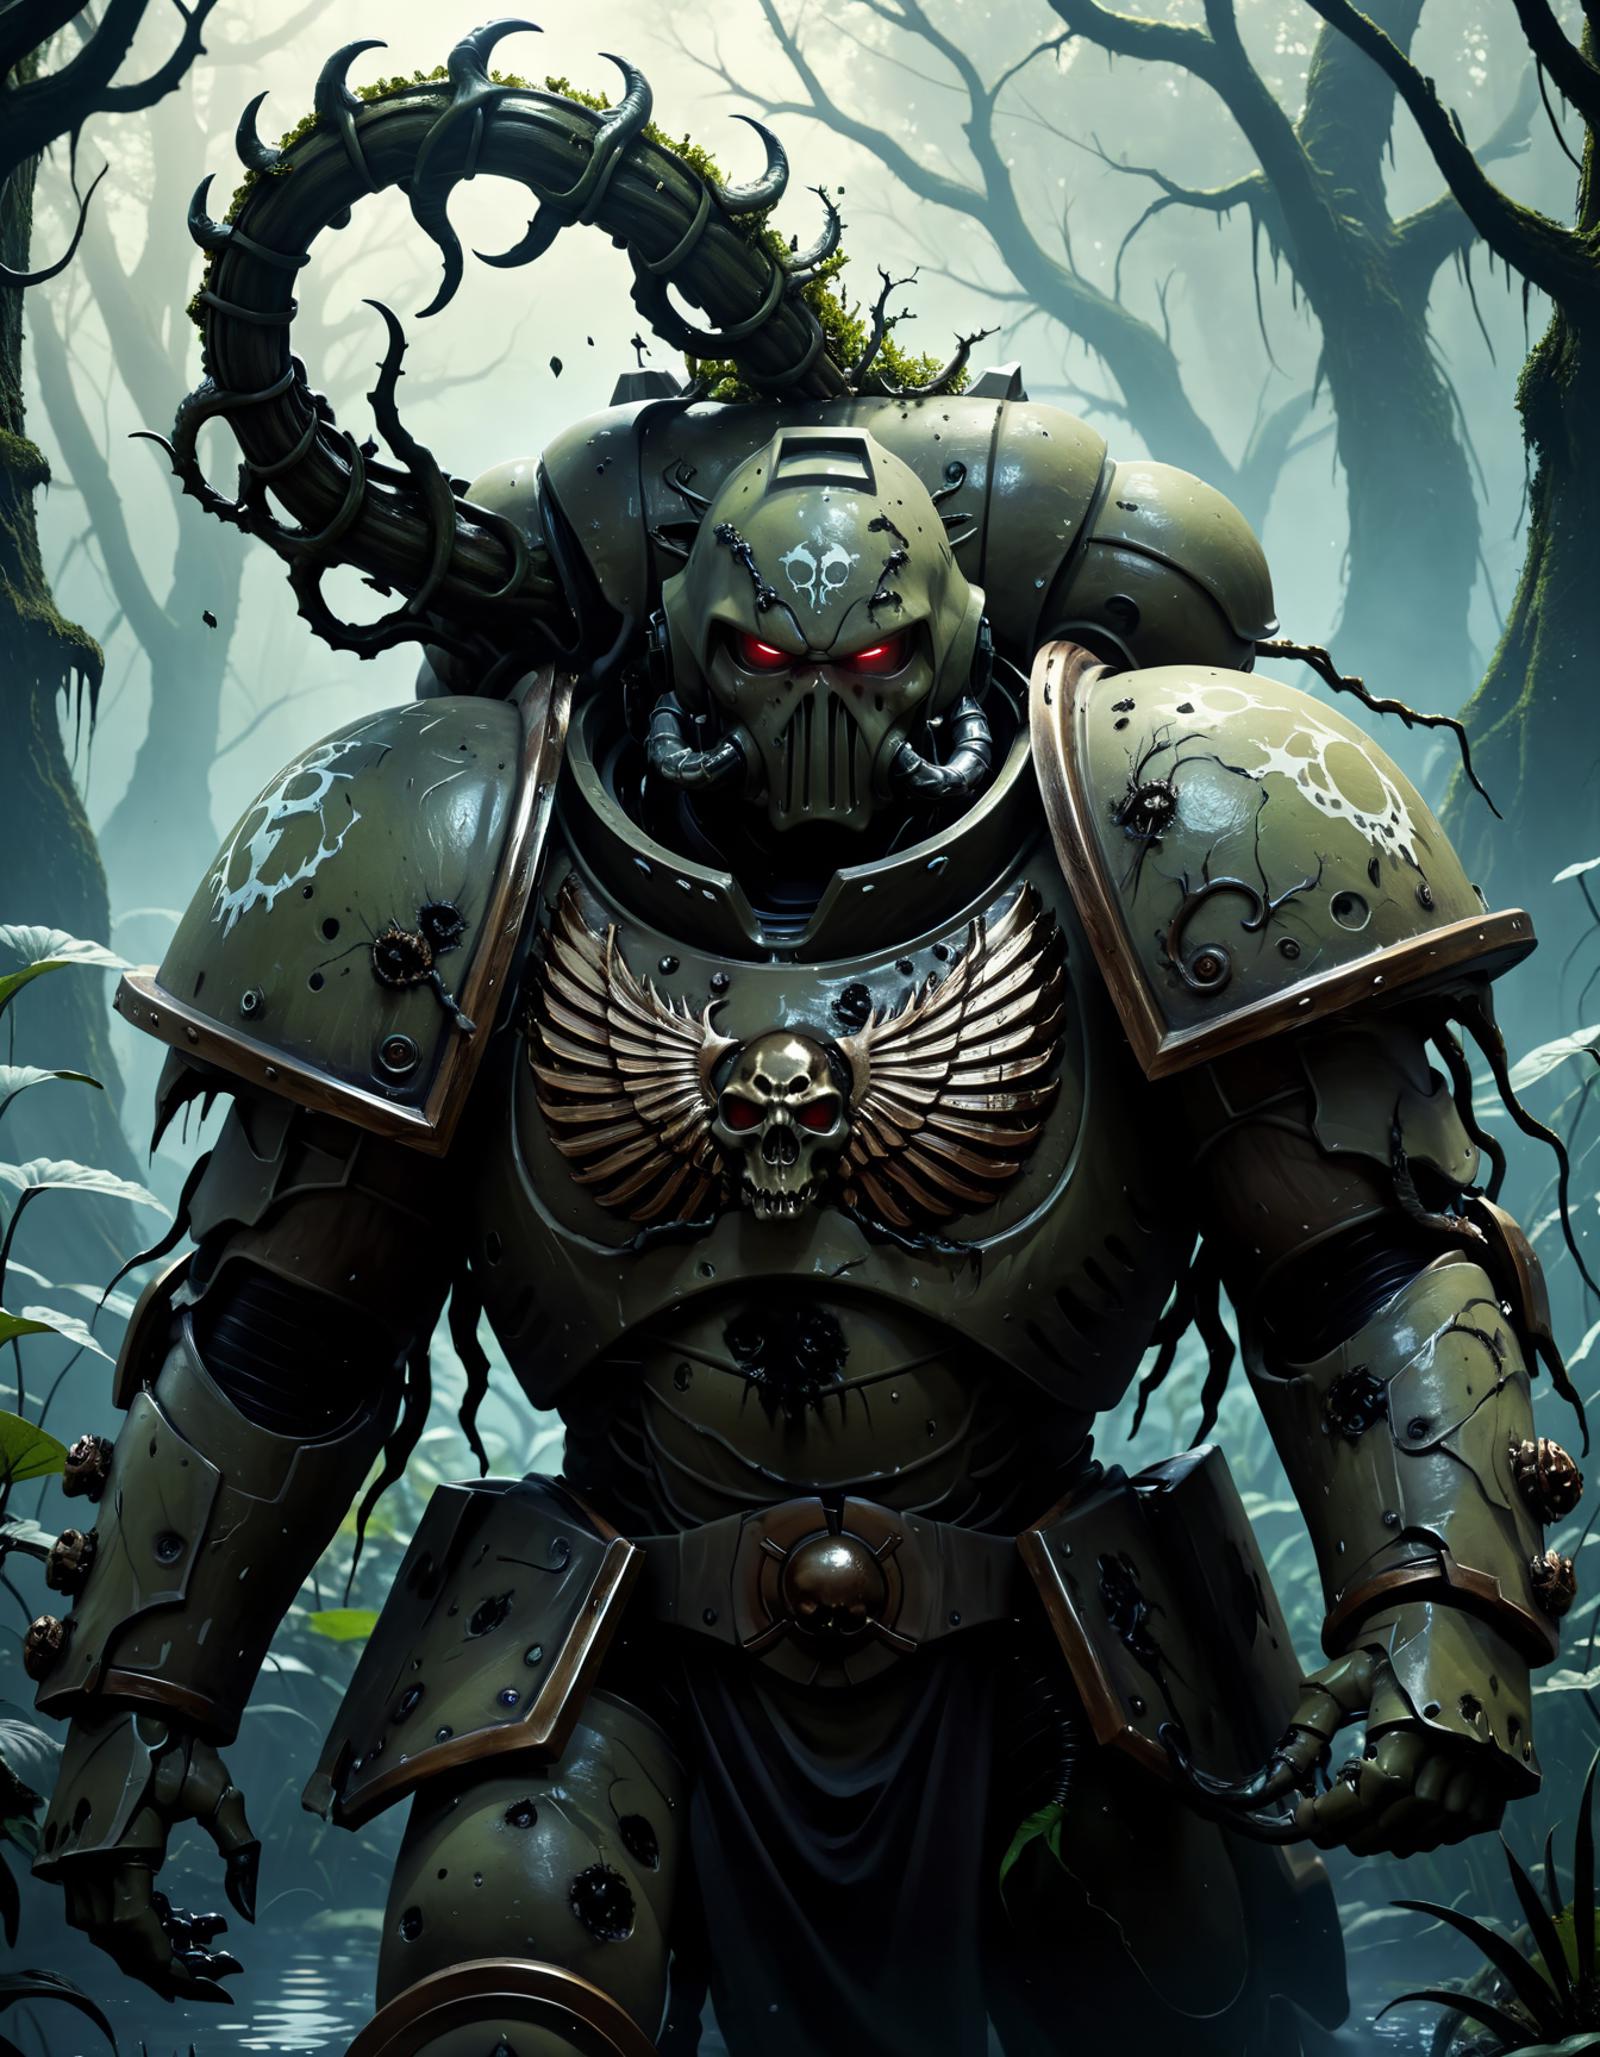 A dark and gory illustration of a warrior with metal armor, scary horns, and a skull on his chest.